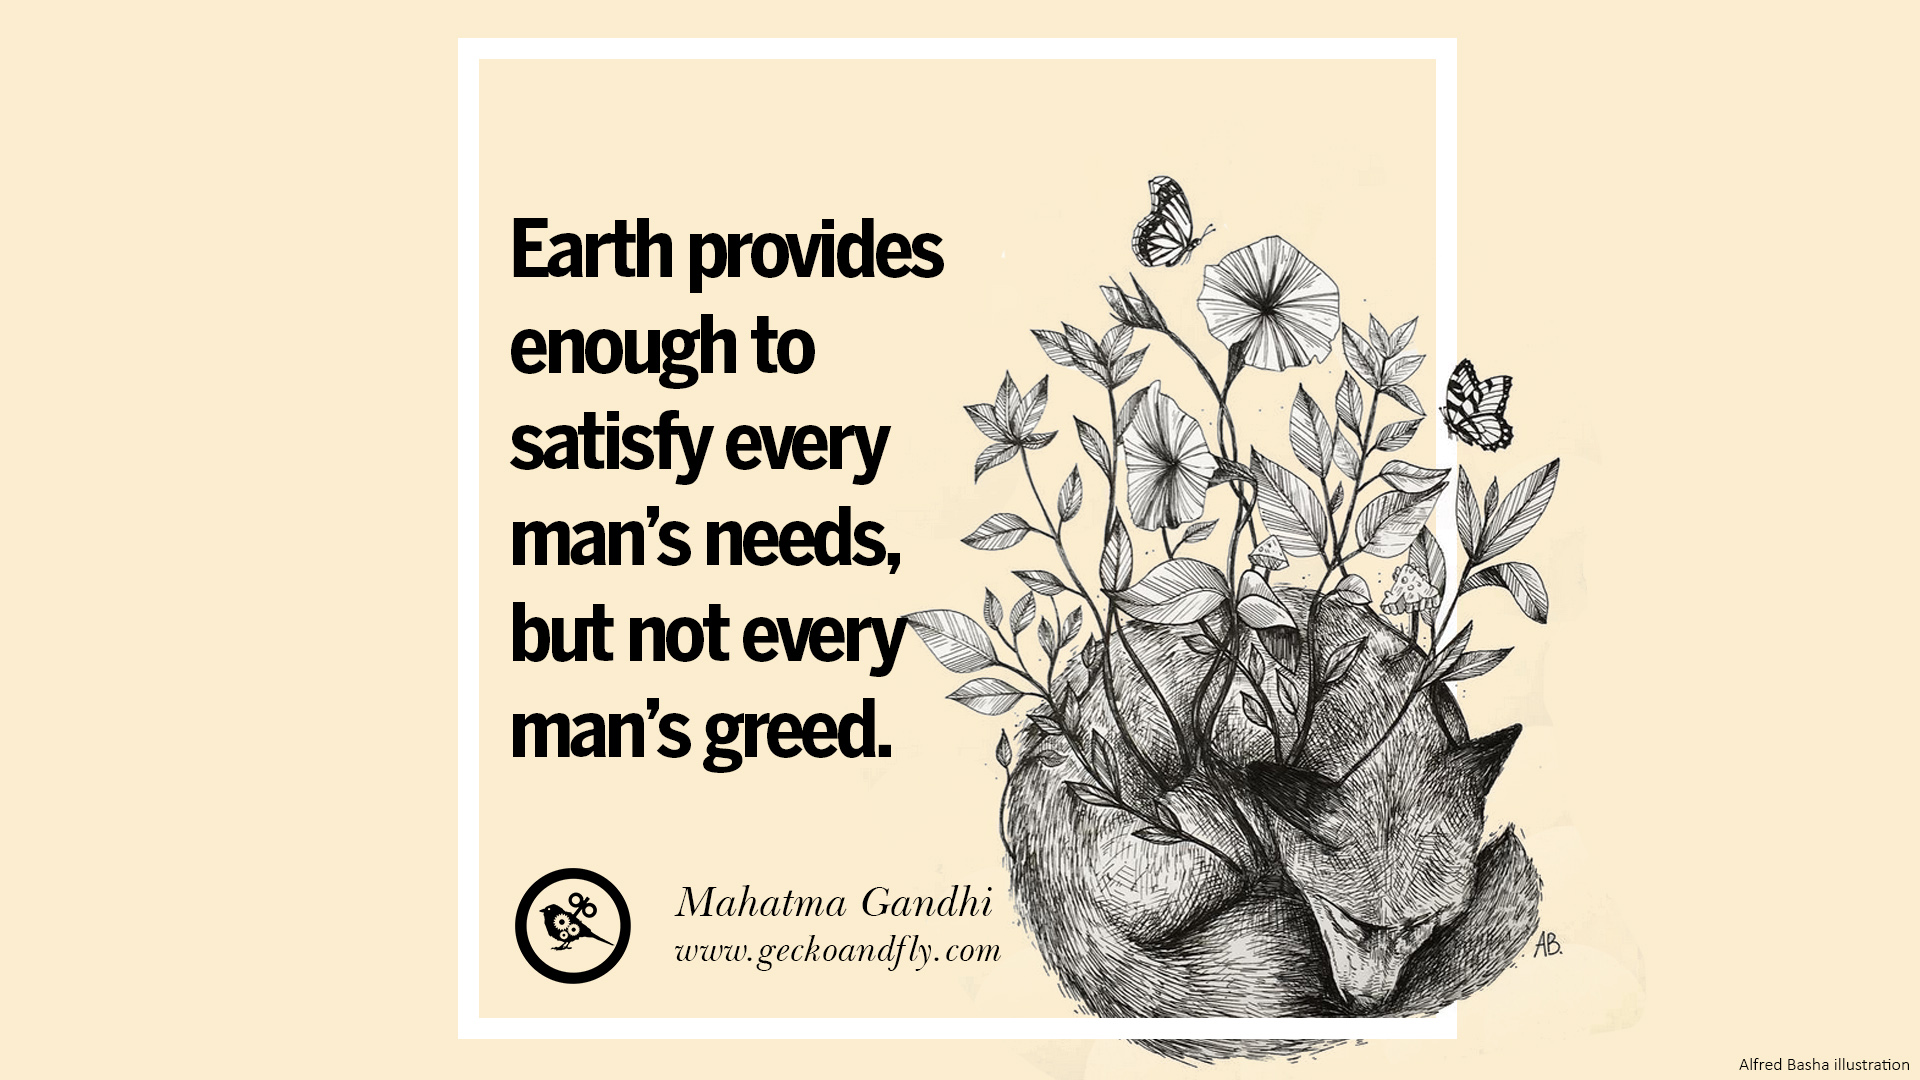 save earth save life quotes